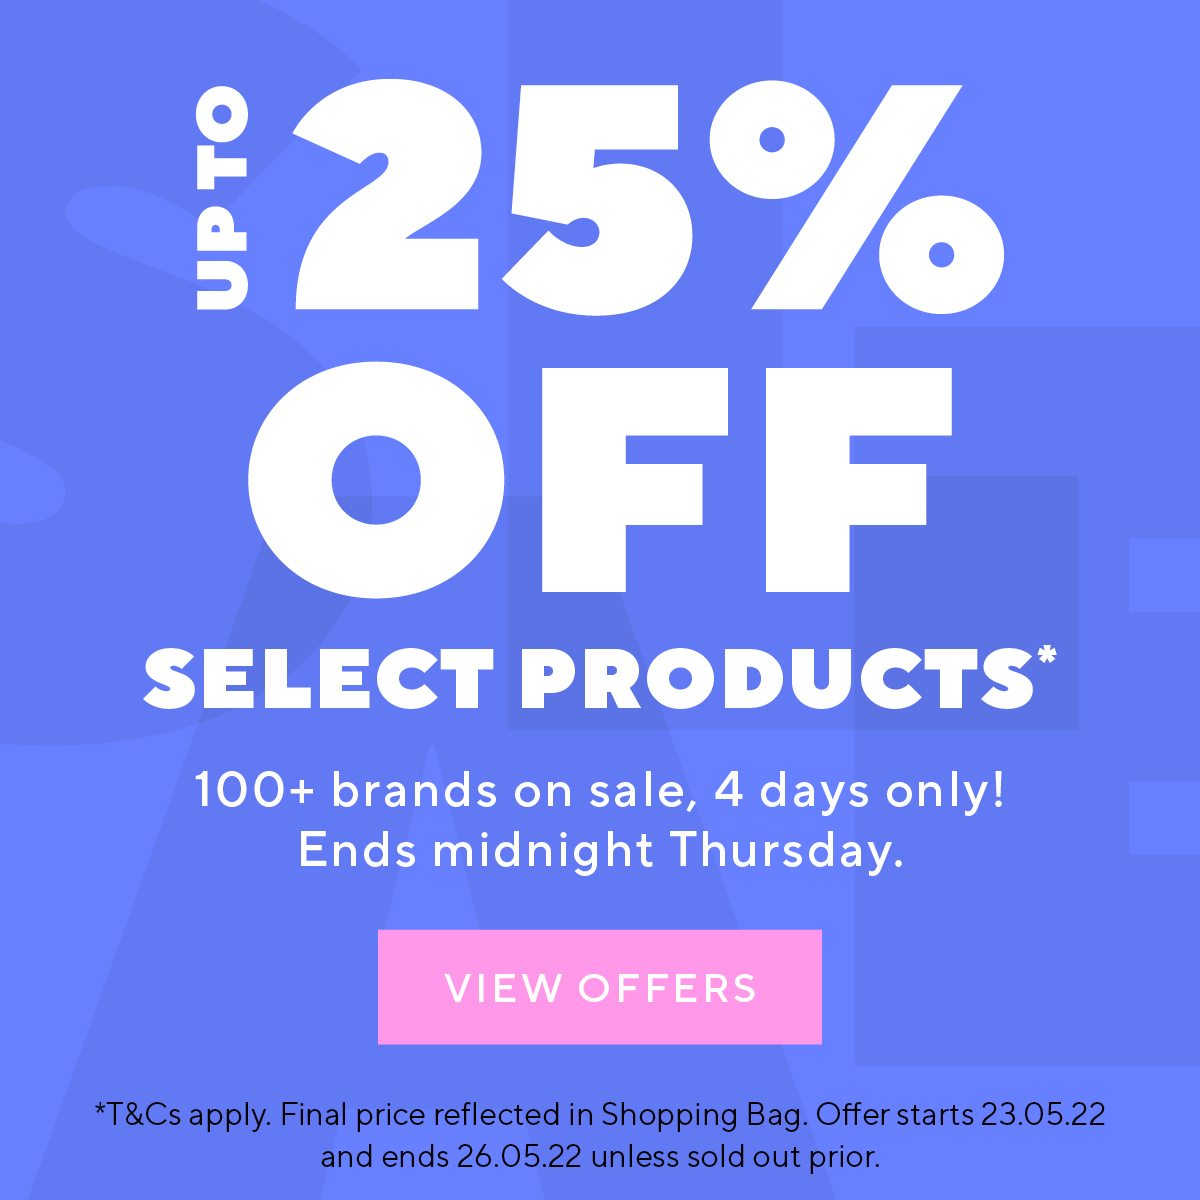 Up to 25% off select products* 